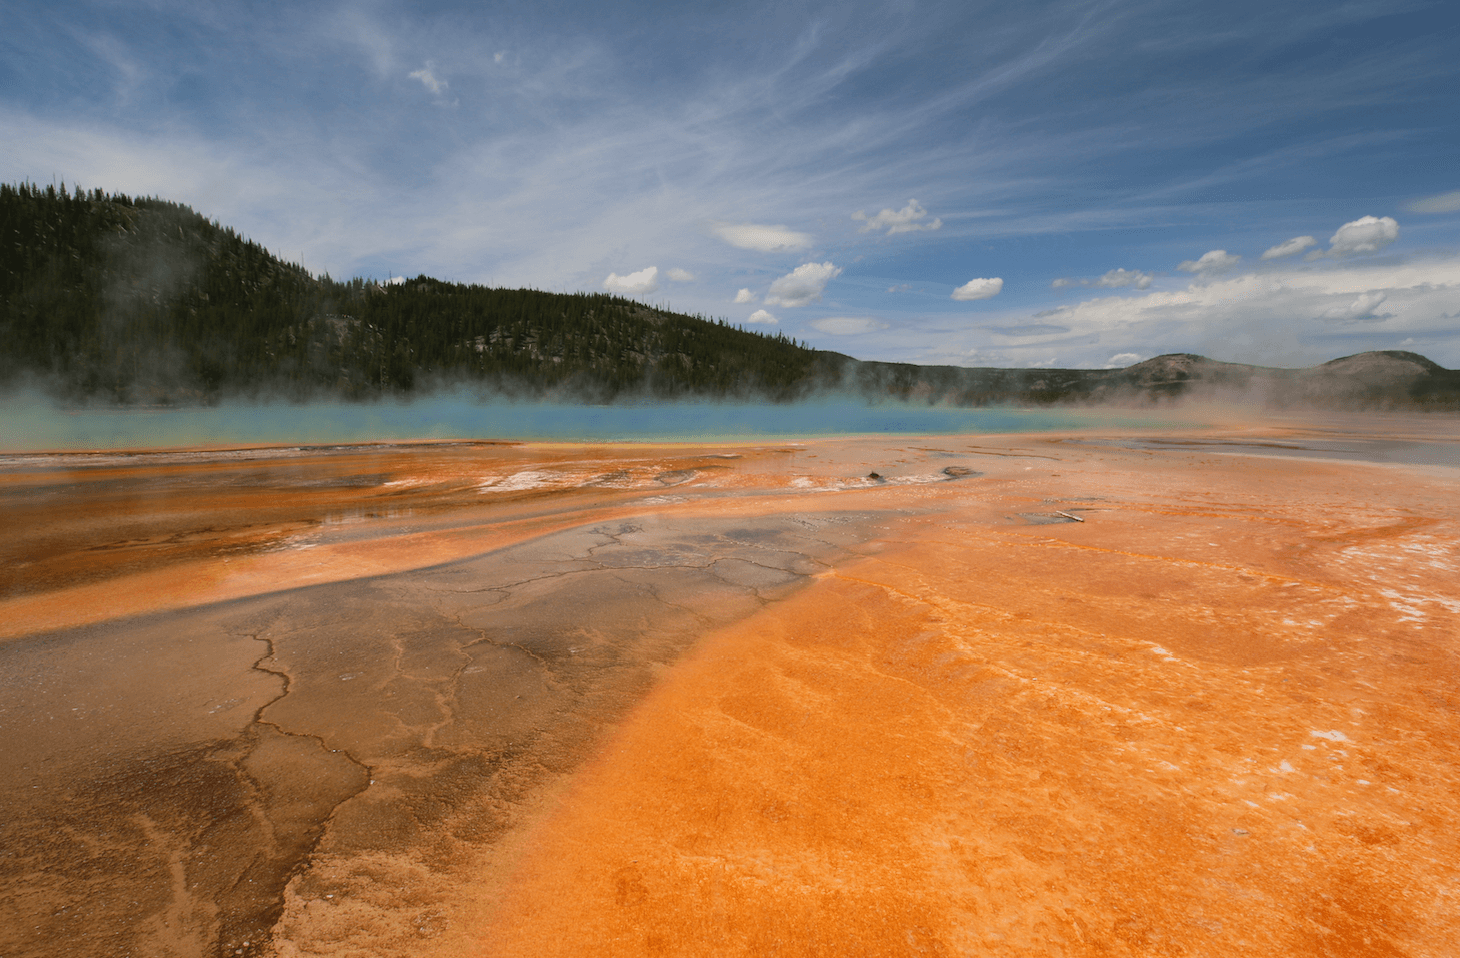 National Park Week - Free Entry Day - Yellowstone